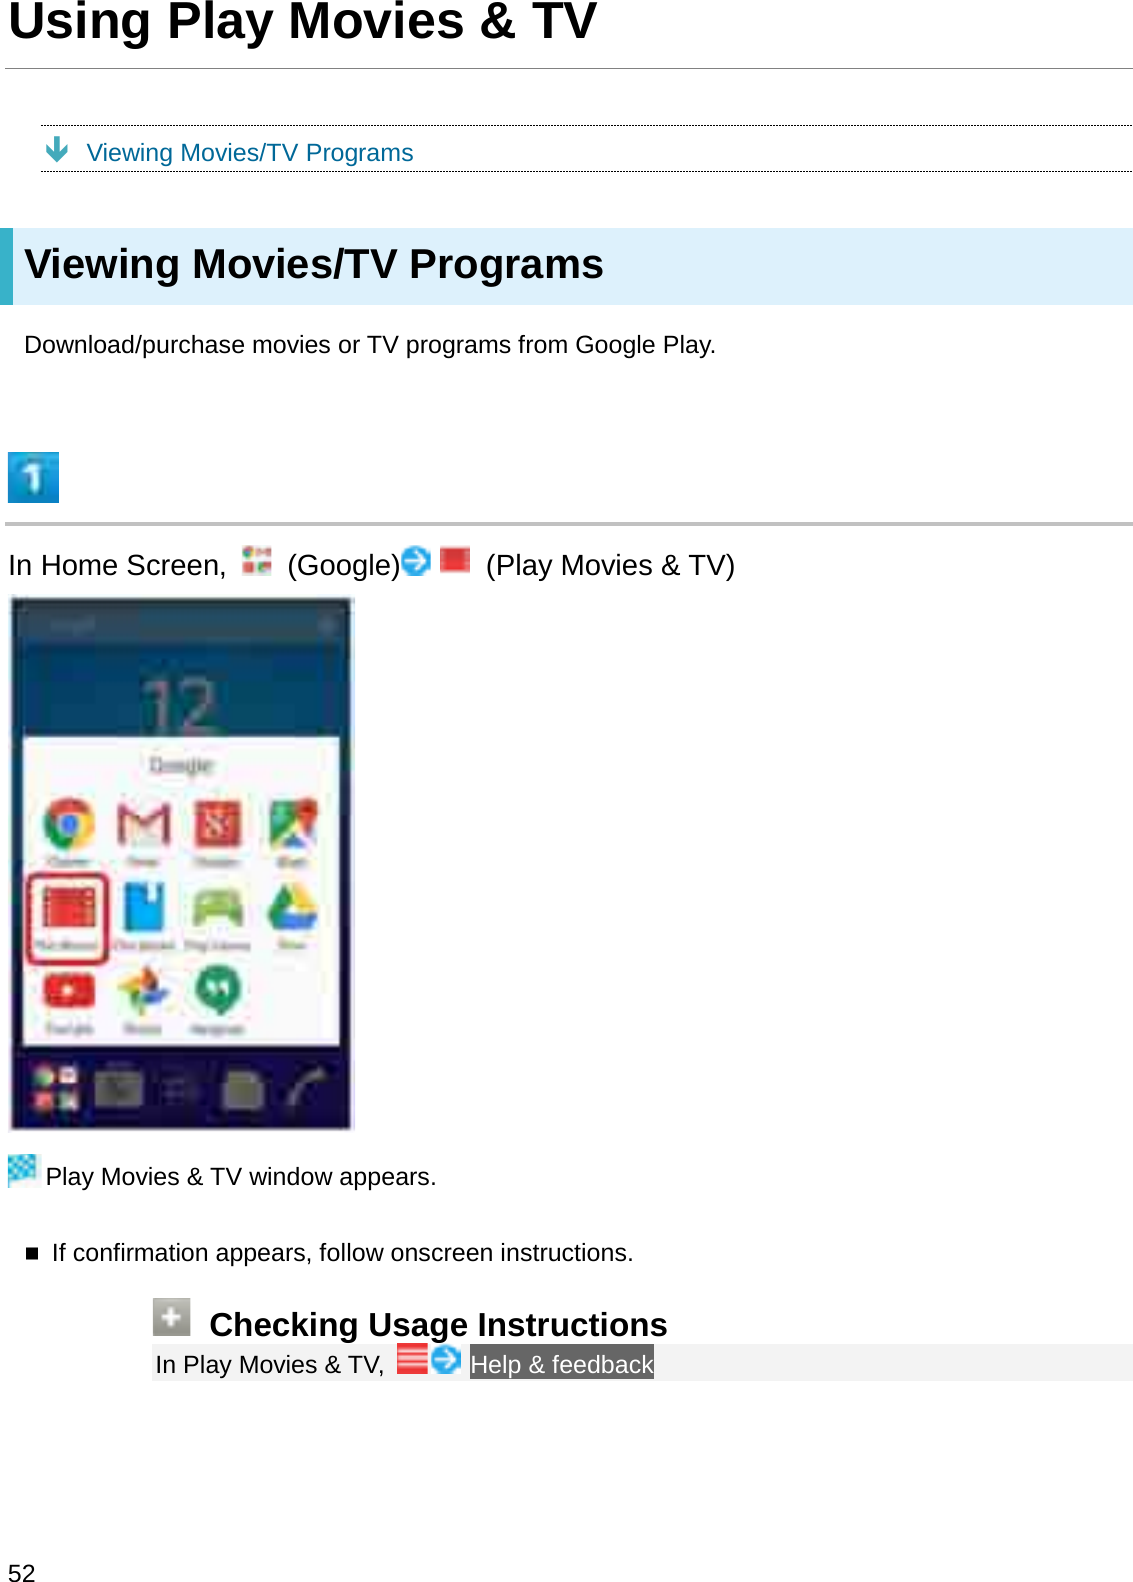 Using Play Movies &amp; TVÐViewing Movies/TV ProgramsViewing Movies/TV ProgramsDownload/purchase movies or TV programs from Google Play.In Home Screen,  (Google) (Play Movies &amp; TV)Play Movies &amp; TV window appears.If confirmation appears, follow onscreen instructions.Checking Usage InstructionsIn Play Movies &amp; TV,  Help &amp; feedback52